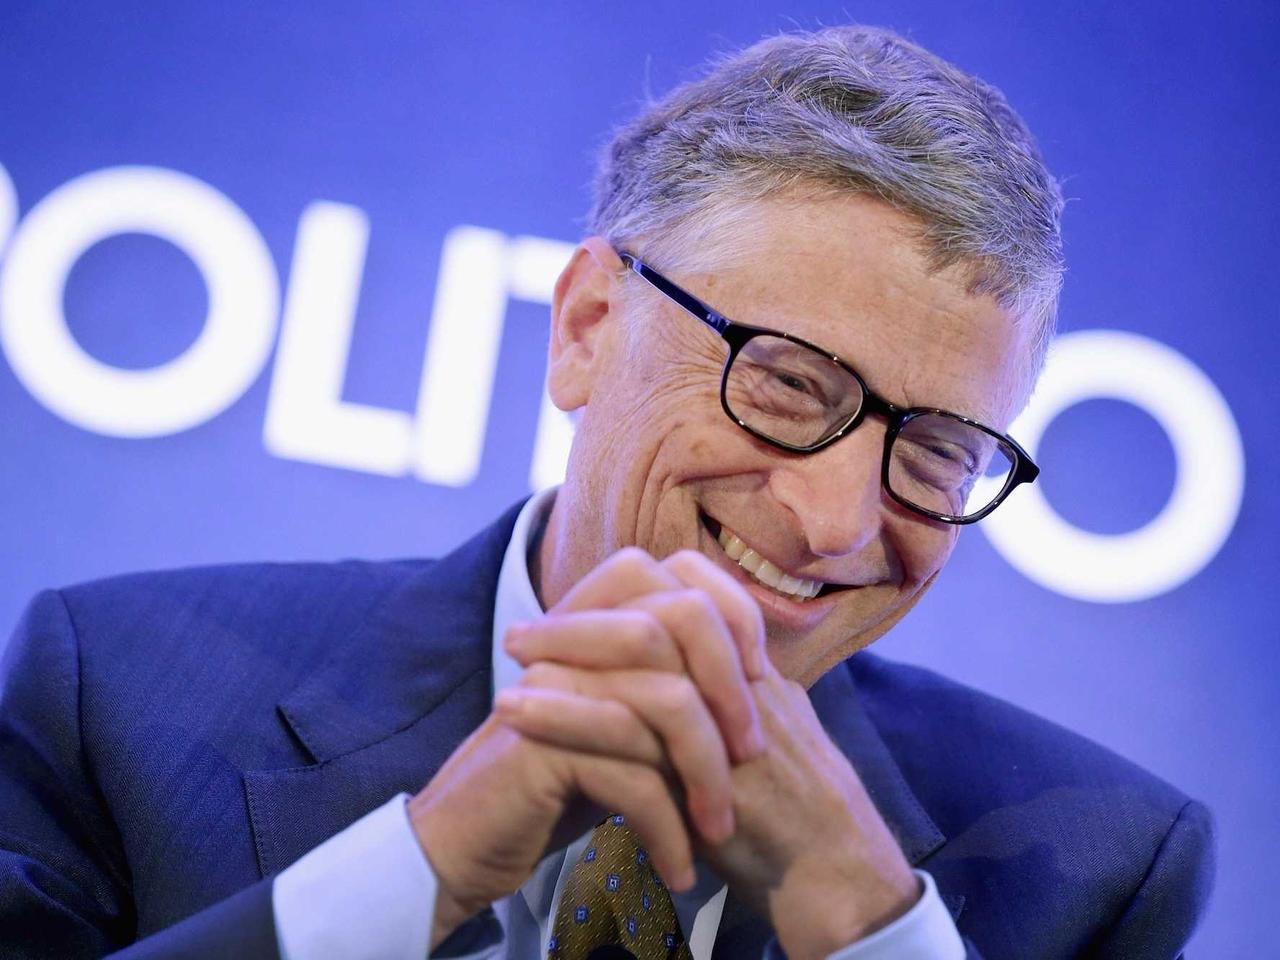 bill-gates-explains-how-he-defines-success--and-it-has-nothing-to-do-with-money-or-power